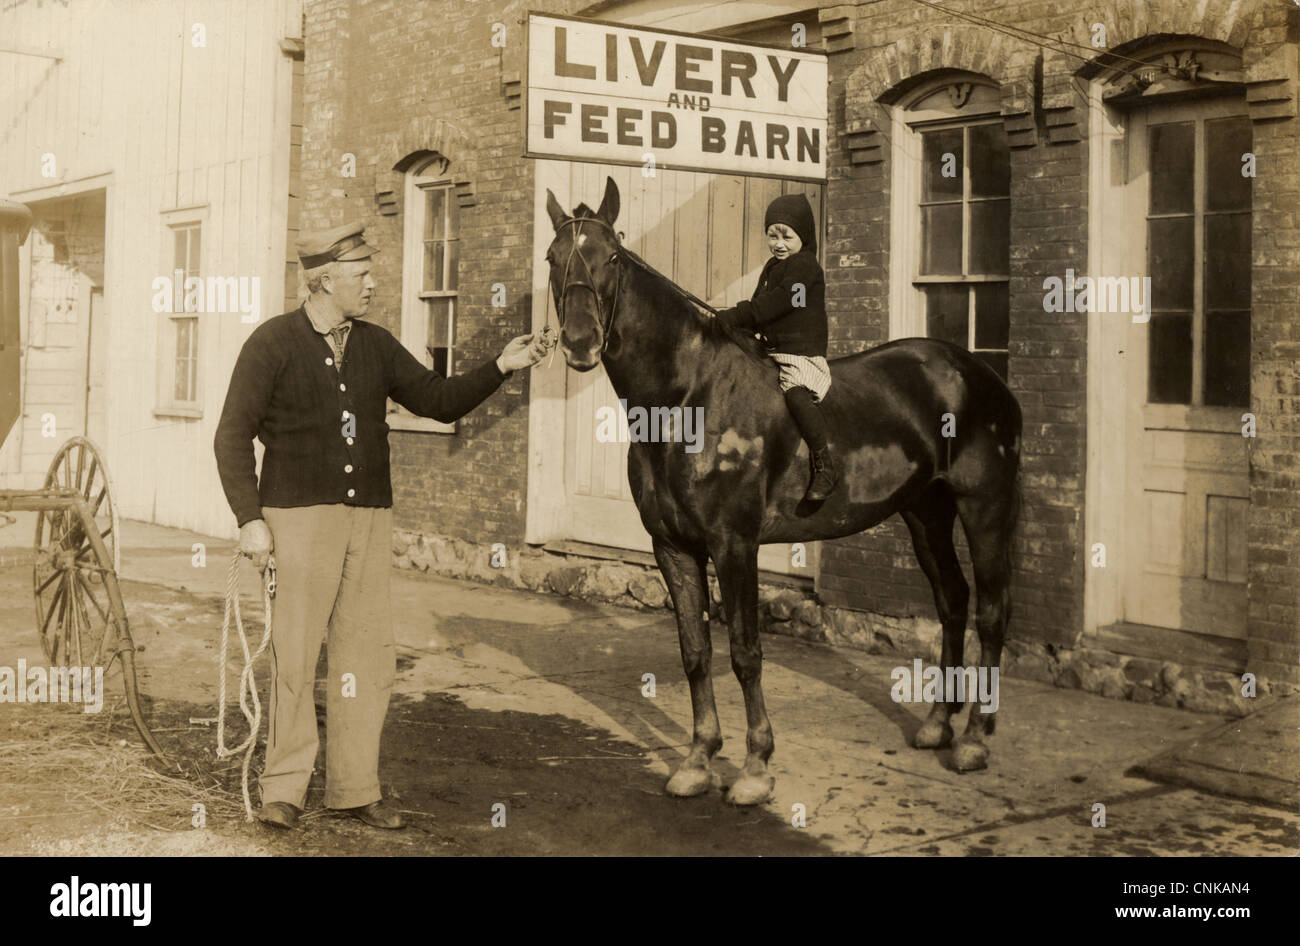 Young Boy on Horseback at Livery and Feed Barn Stock Photo